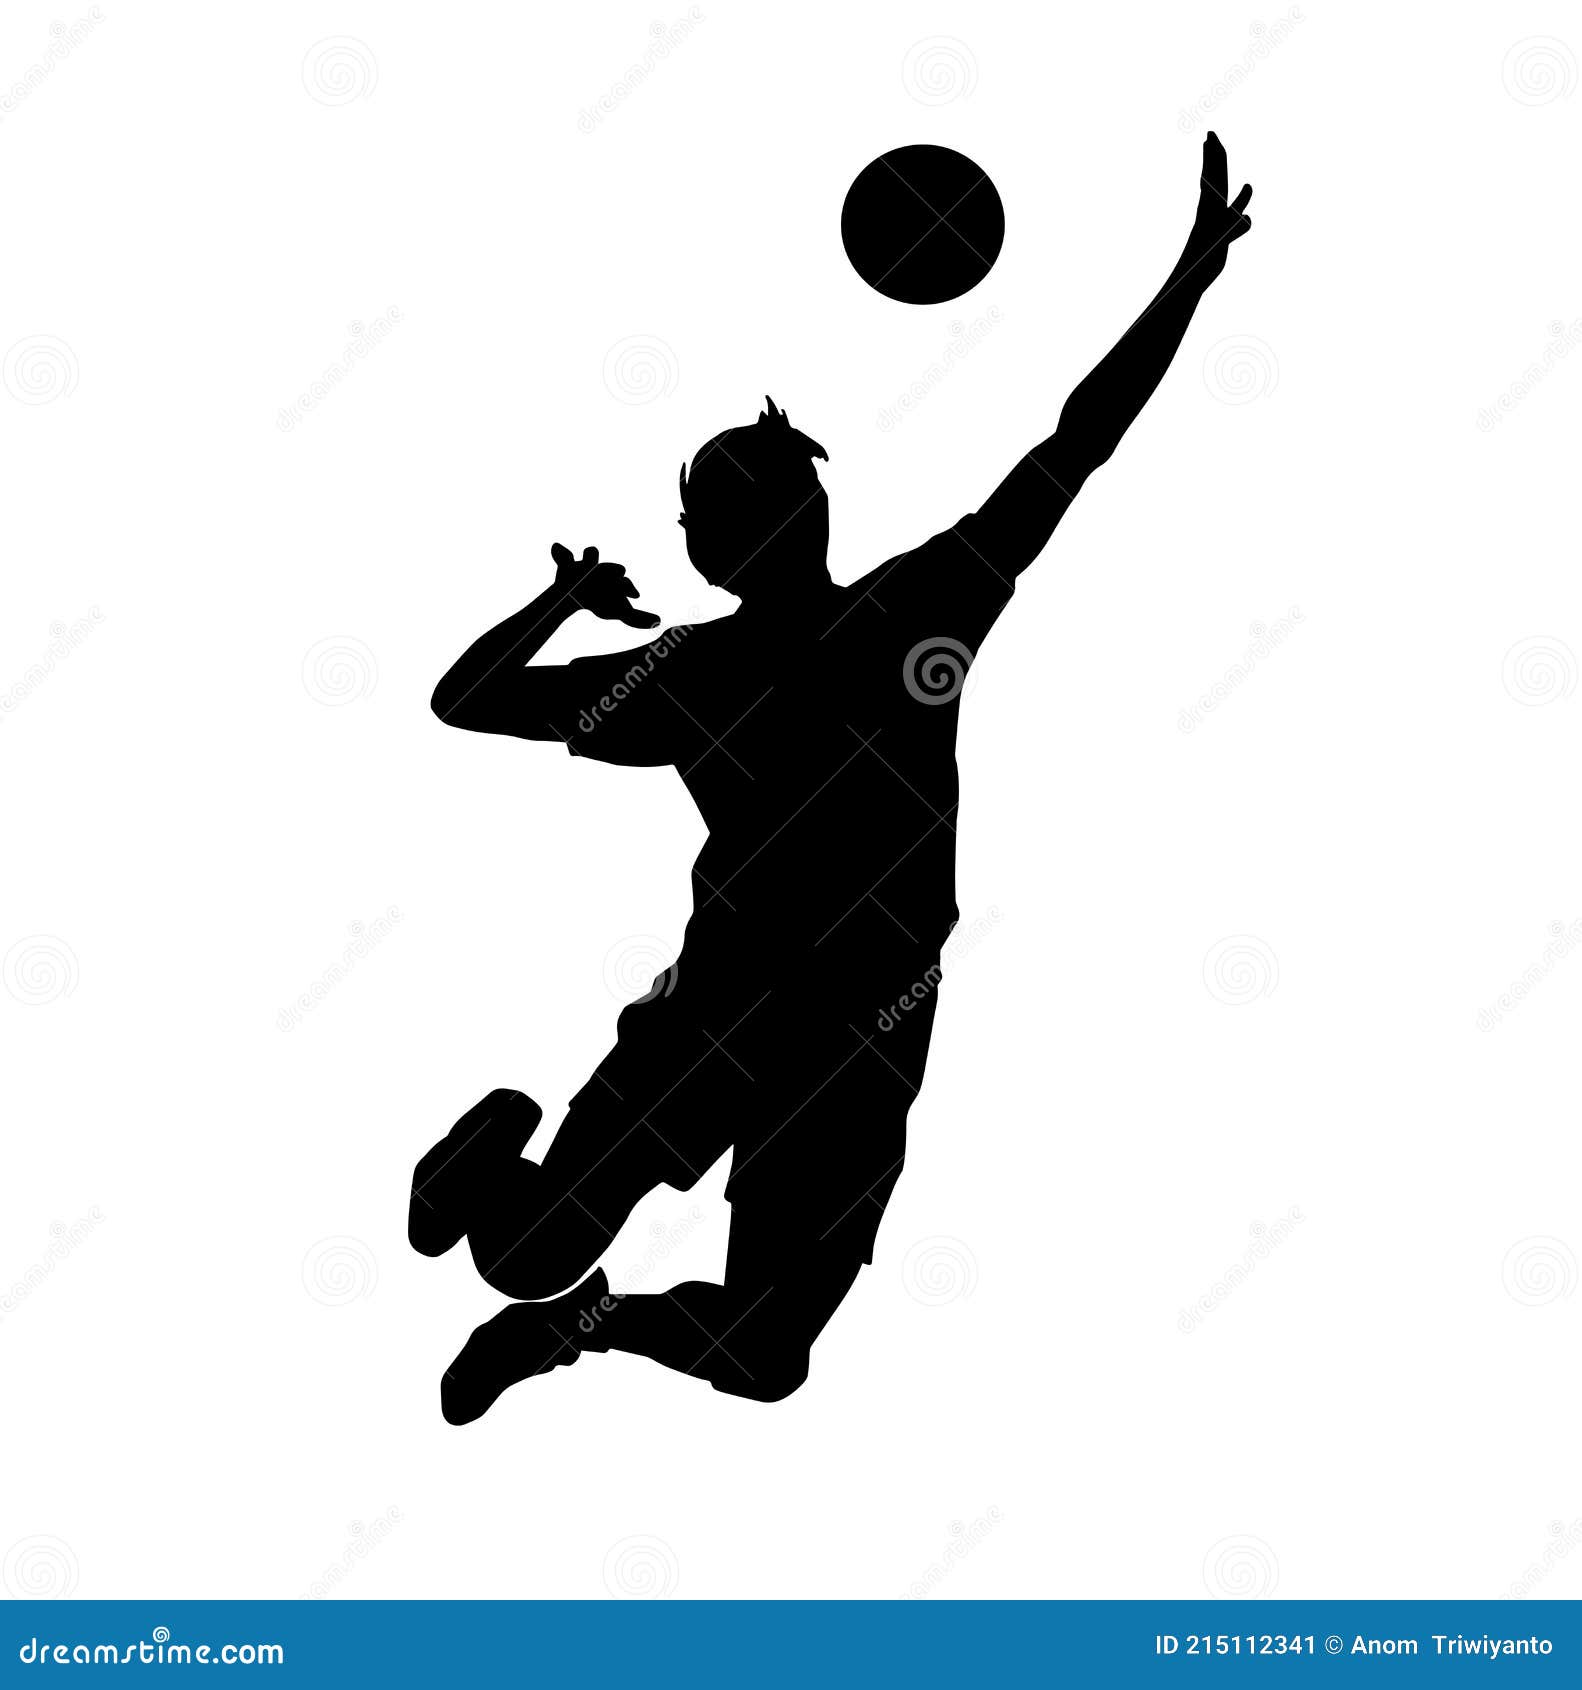 Male Volley Player Silhouette Stock Vector - Illustration of abstract ...